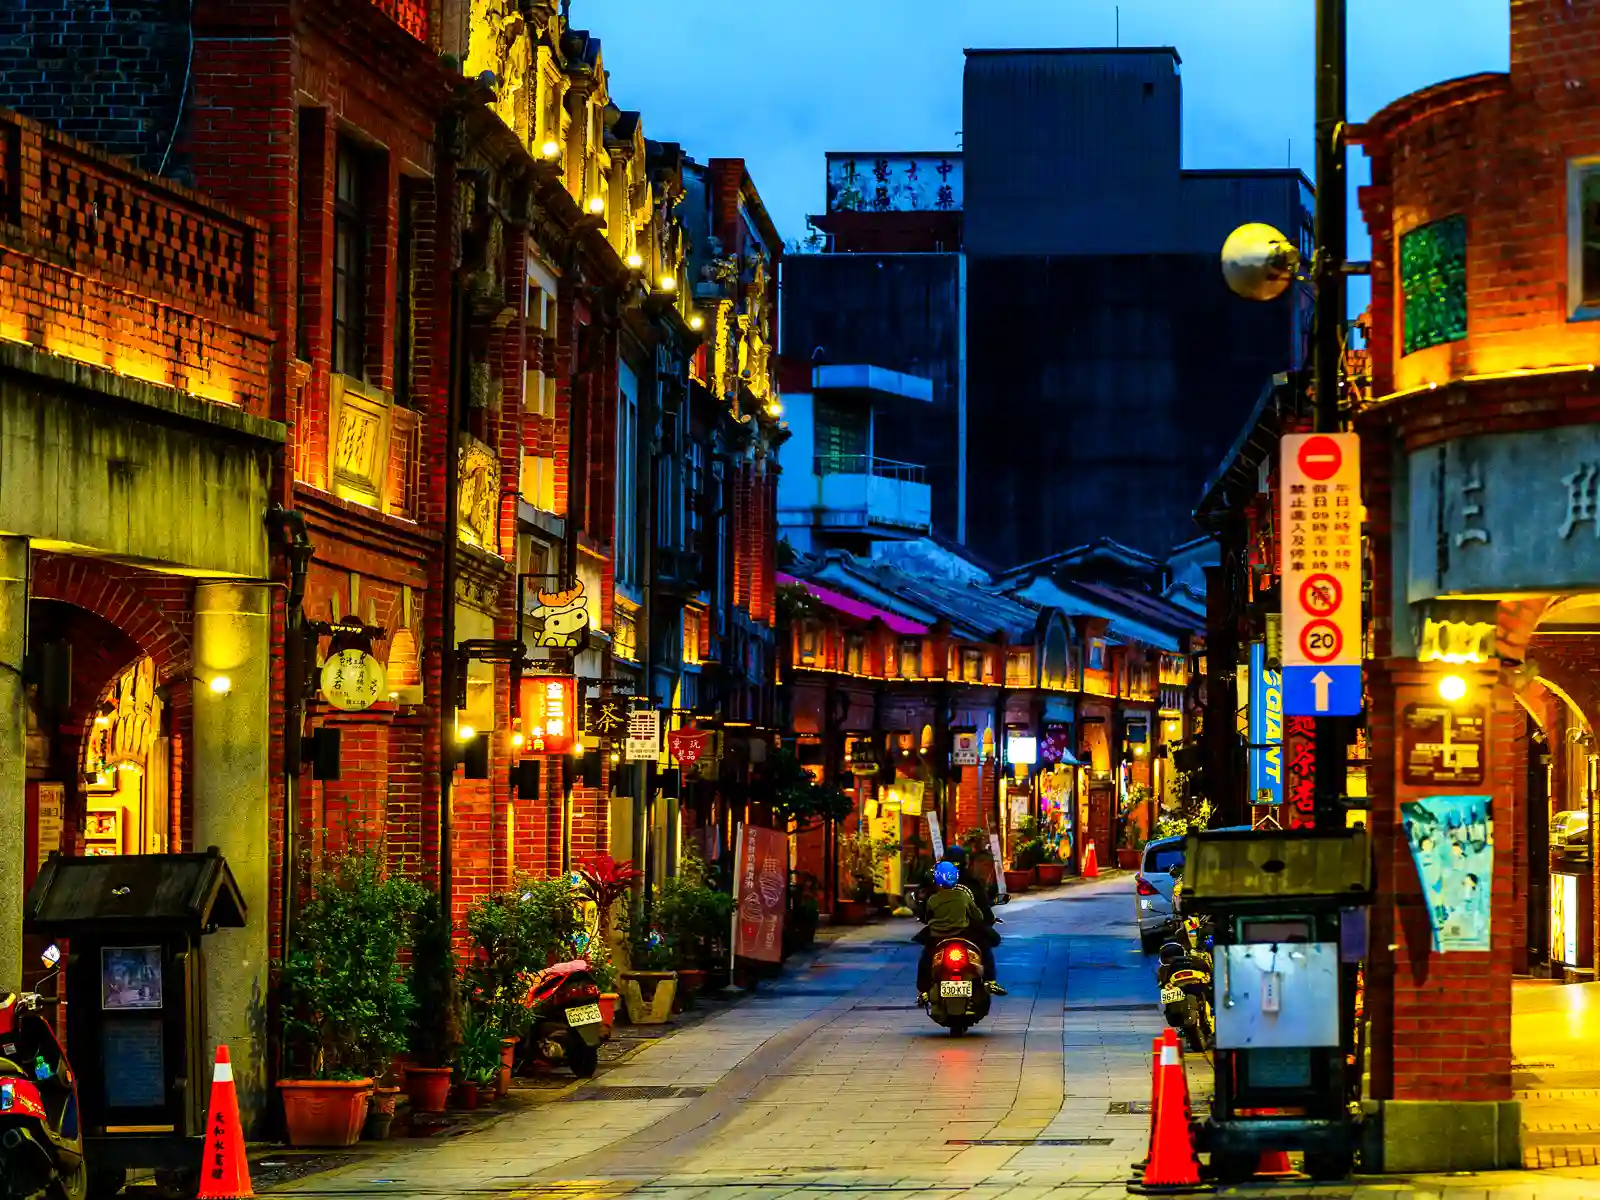 The buildings of Sanxia Old Street are are illuminated and glow a warm red hue at dusk.